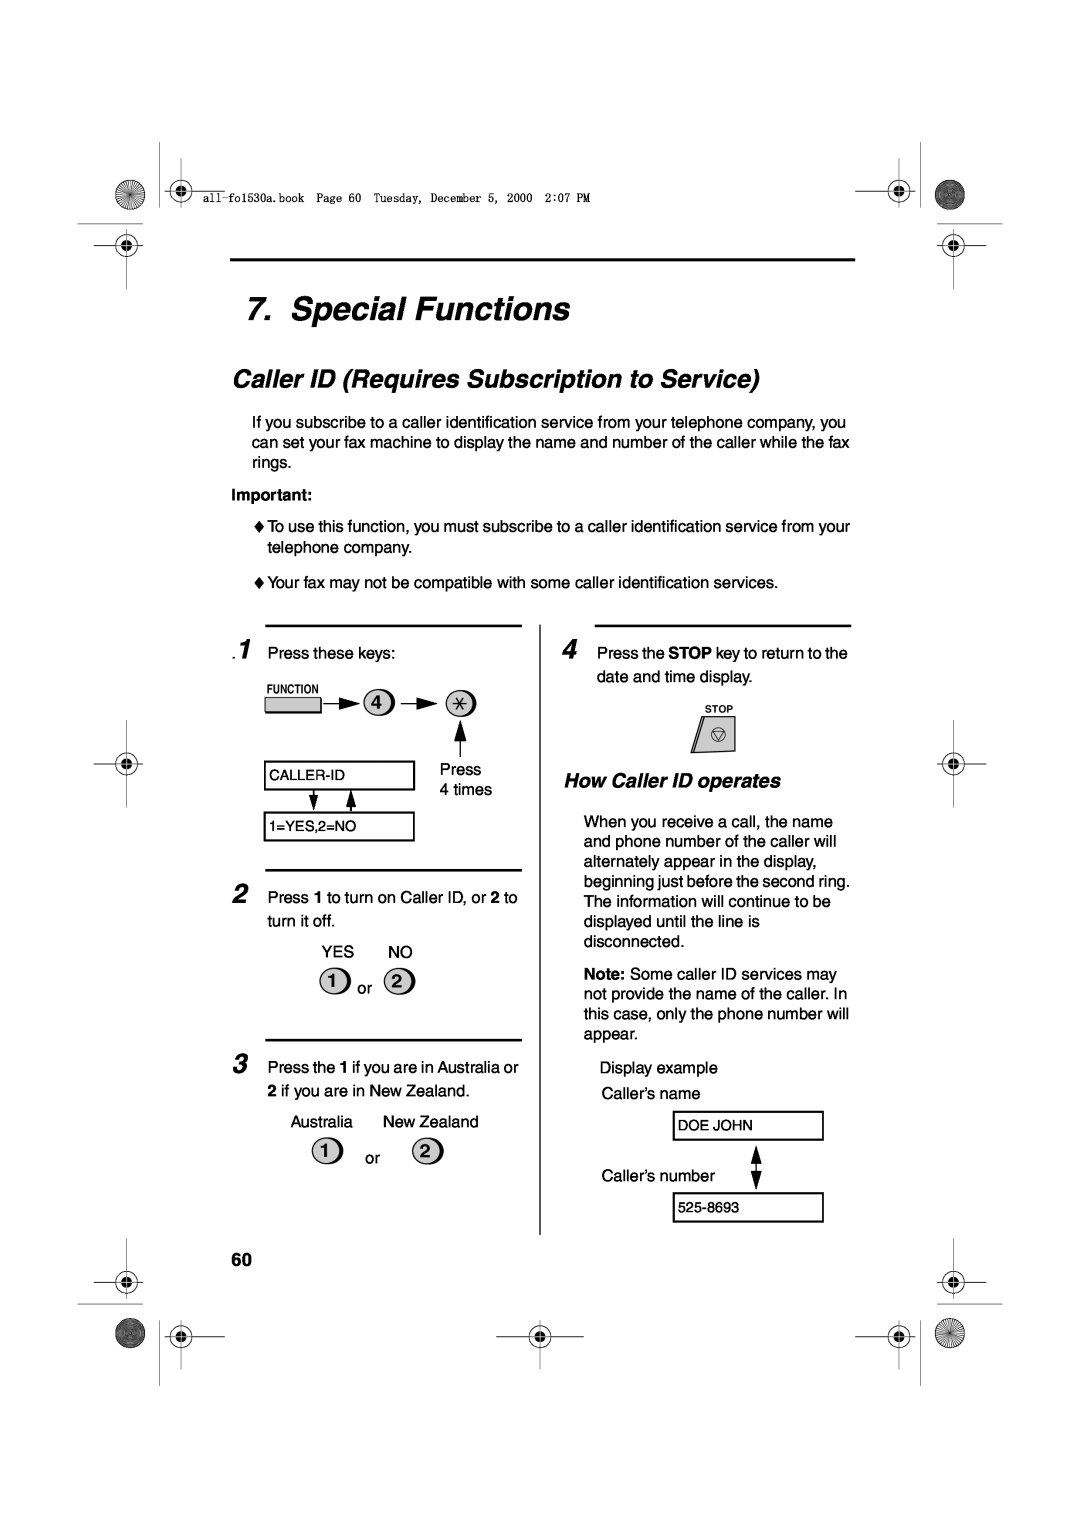 Sharp FO-1530 operation manual Special Functions, Caller ID Requires Subscription to Service, How Caller ID operates, 1 or 